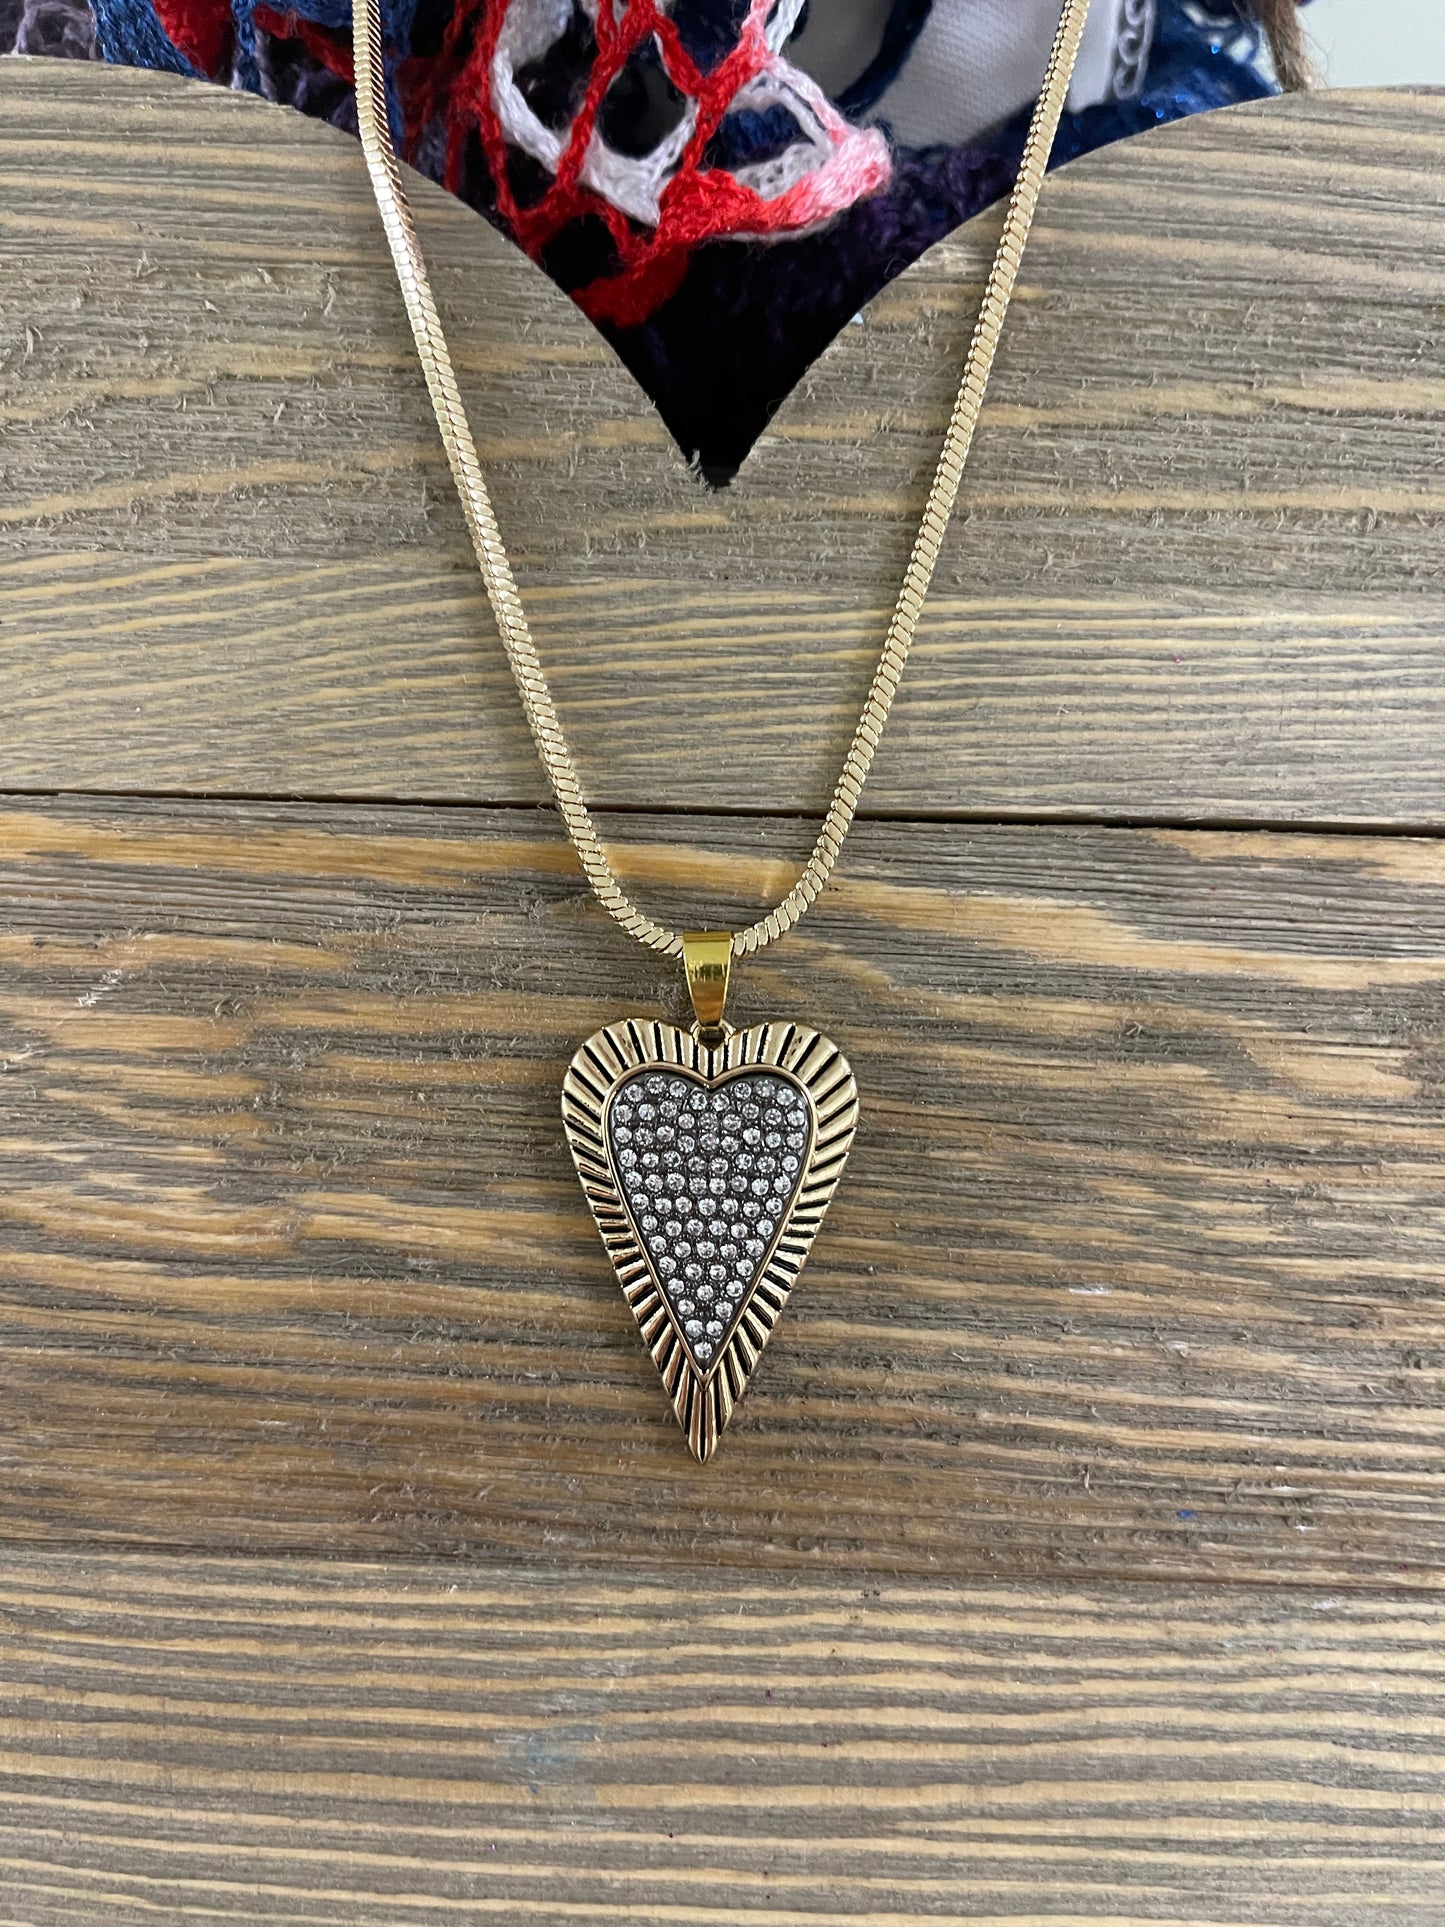 Rhinestone Heart Pendant on a Gold chain NecklacePink tiful of LOVE